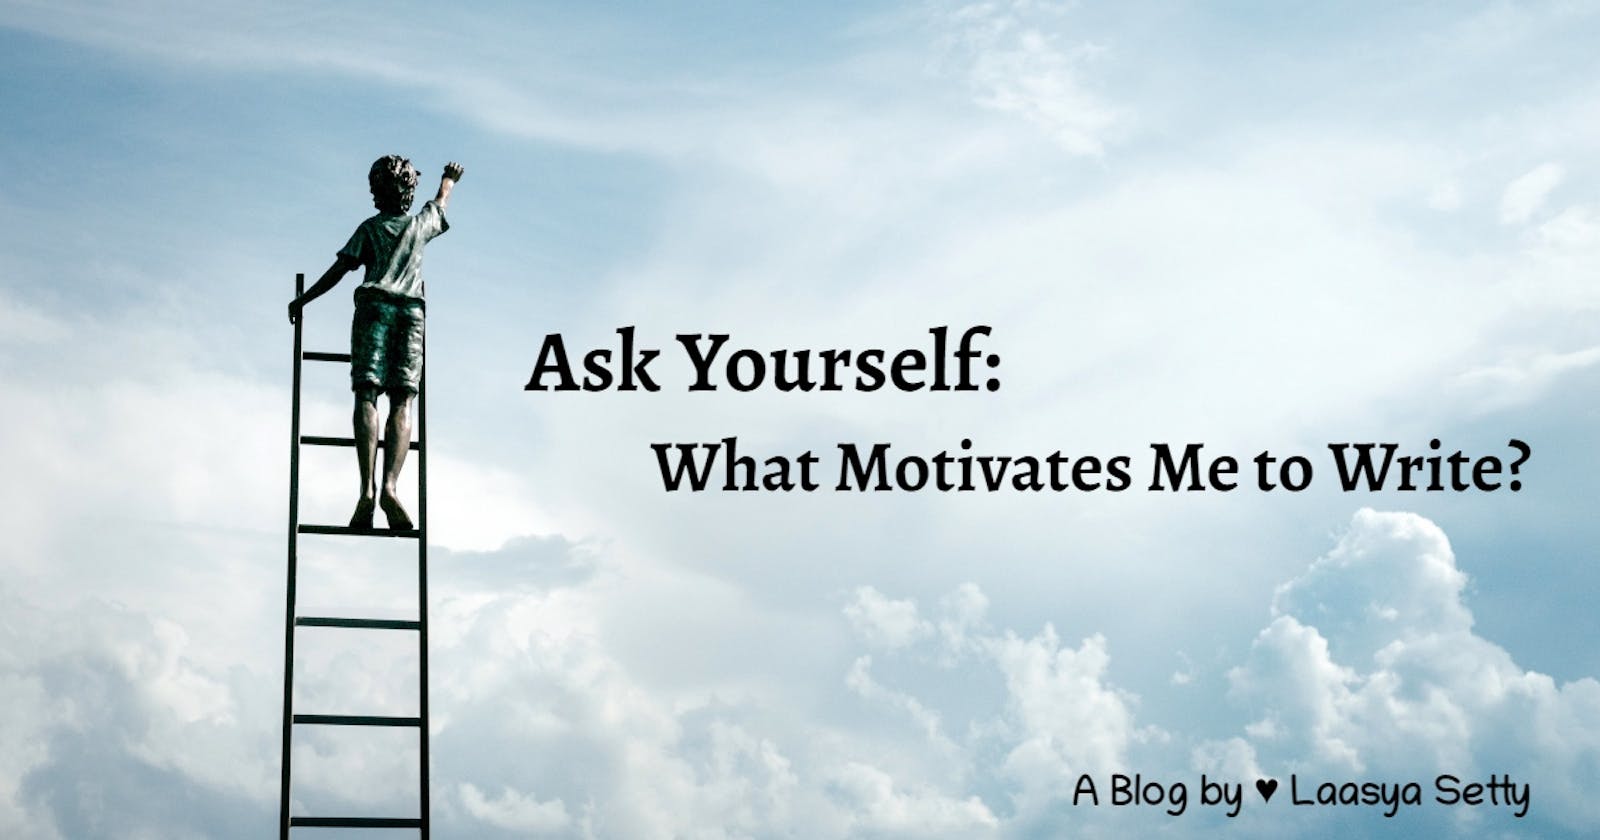 Ask Yourself: What Motivates Me to Write?